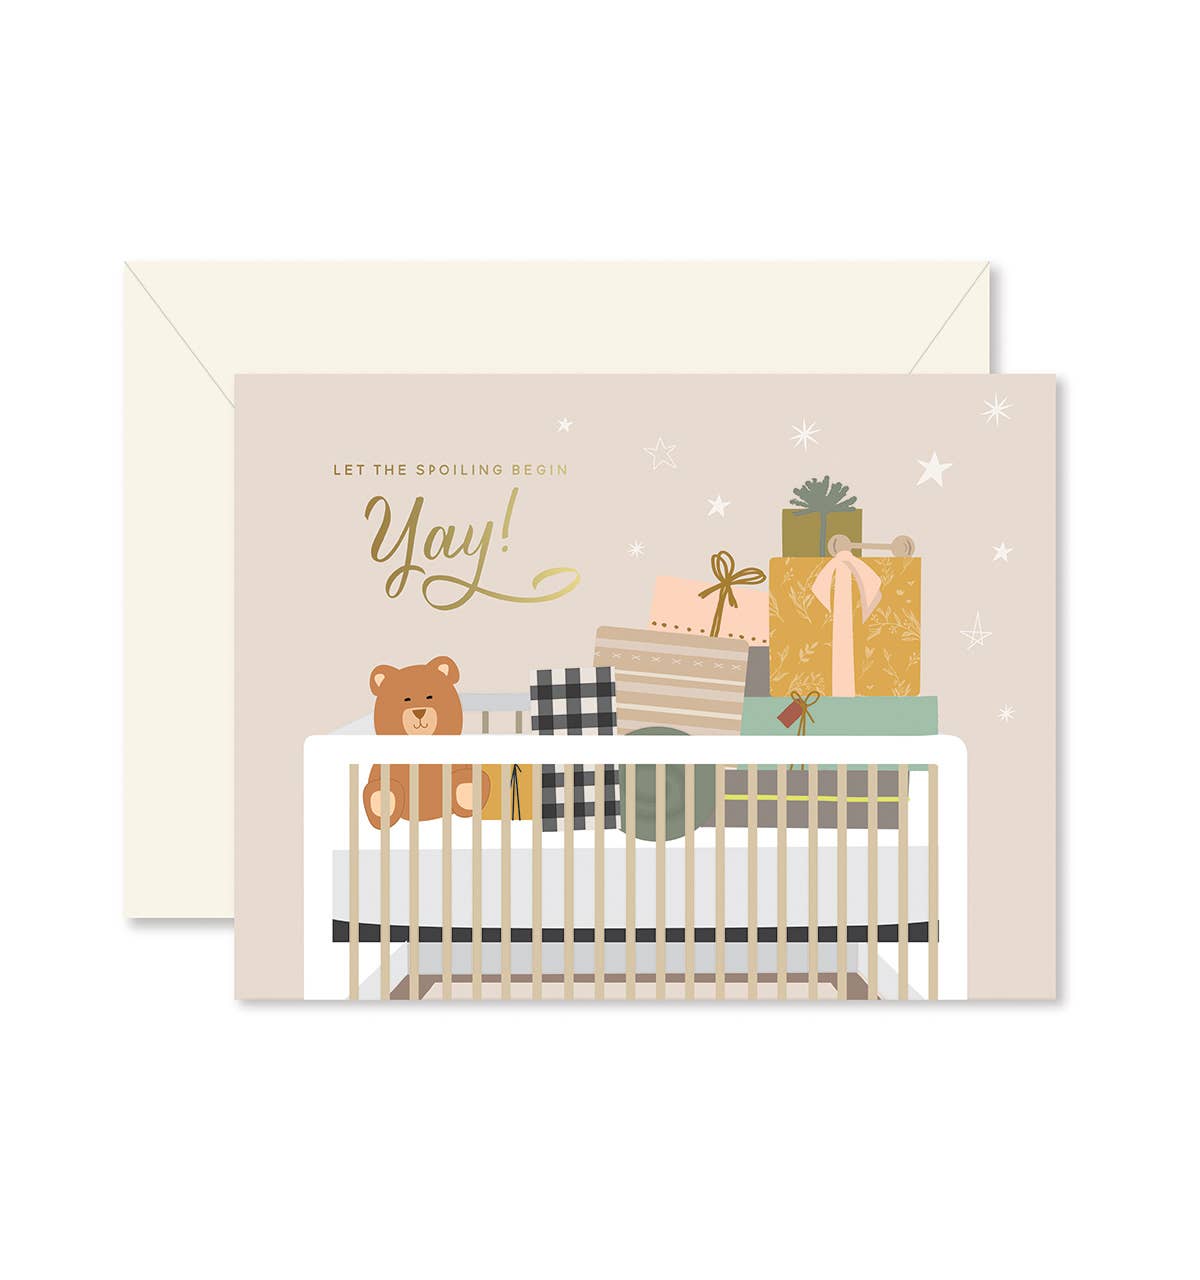 SPOILING BABY GREETING CARD